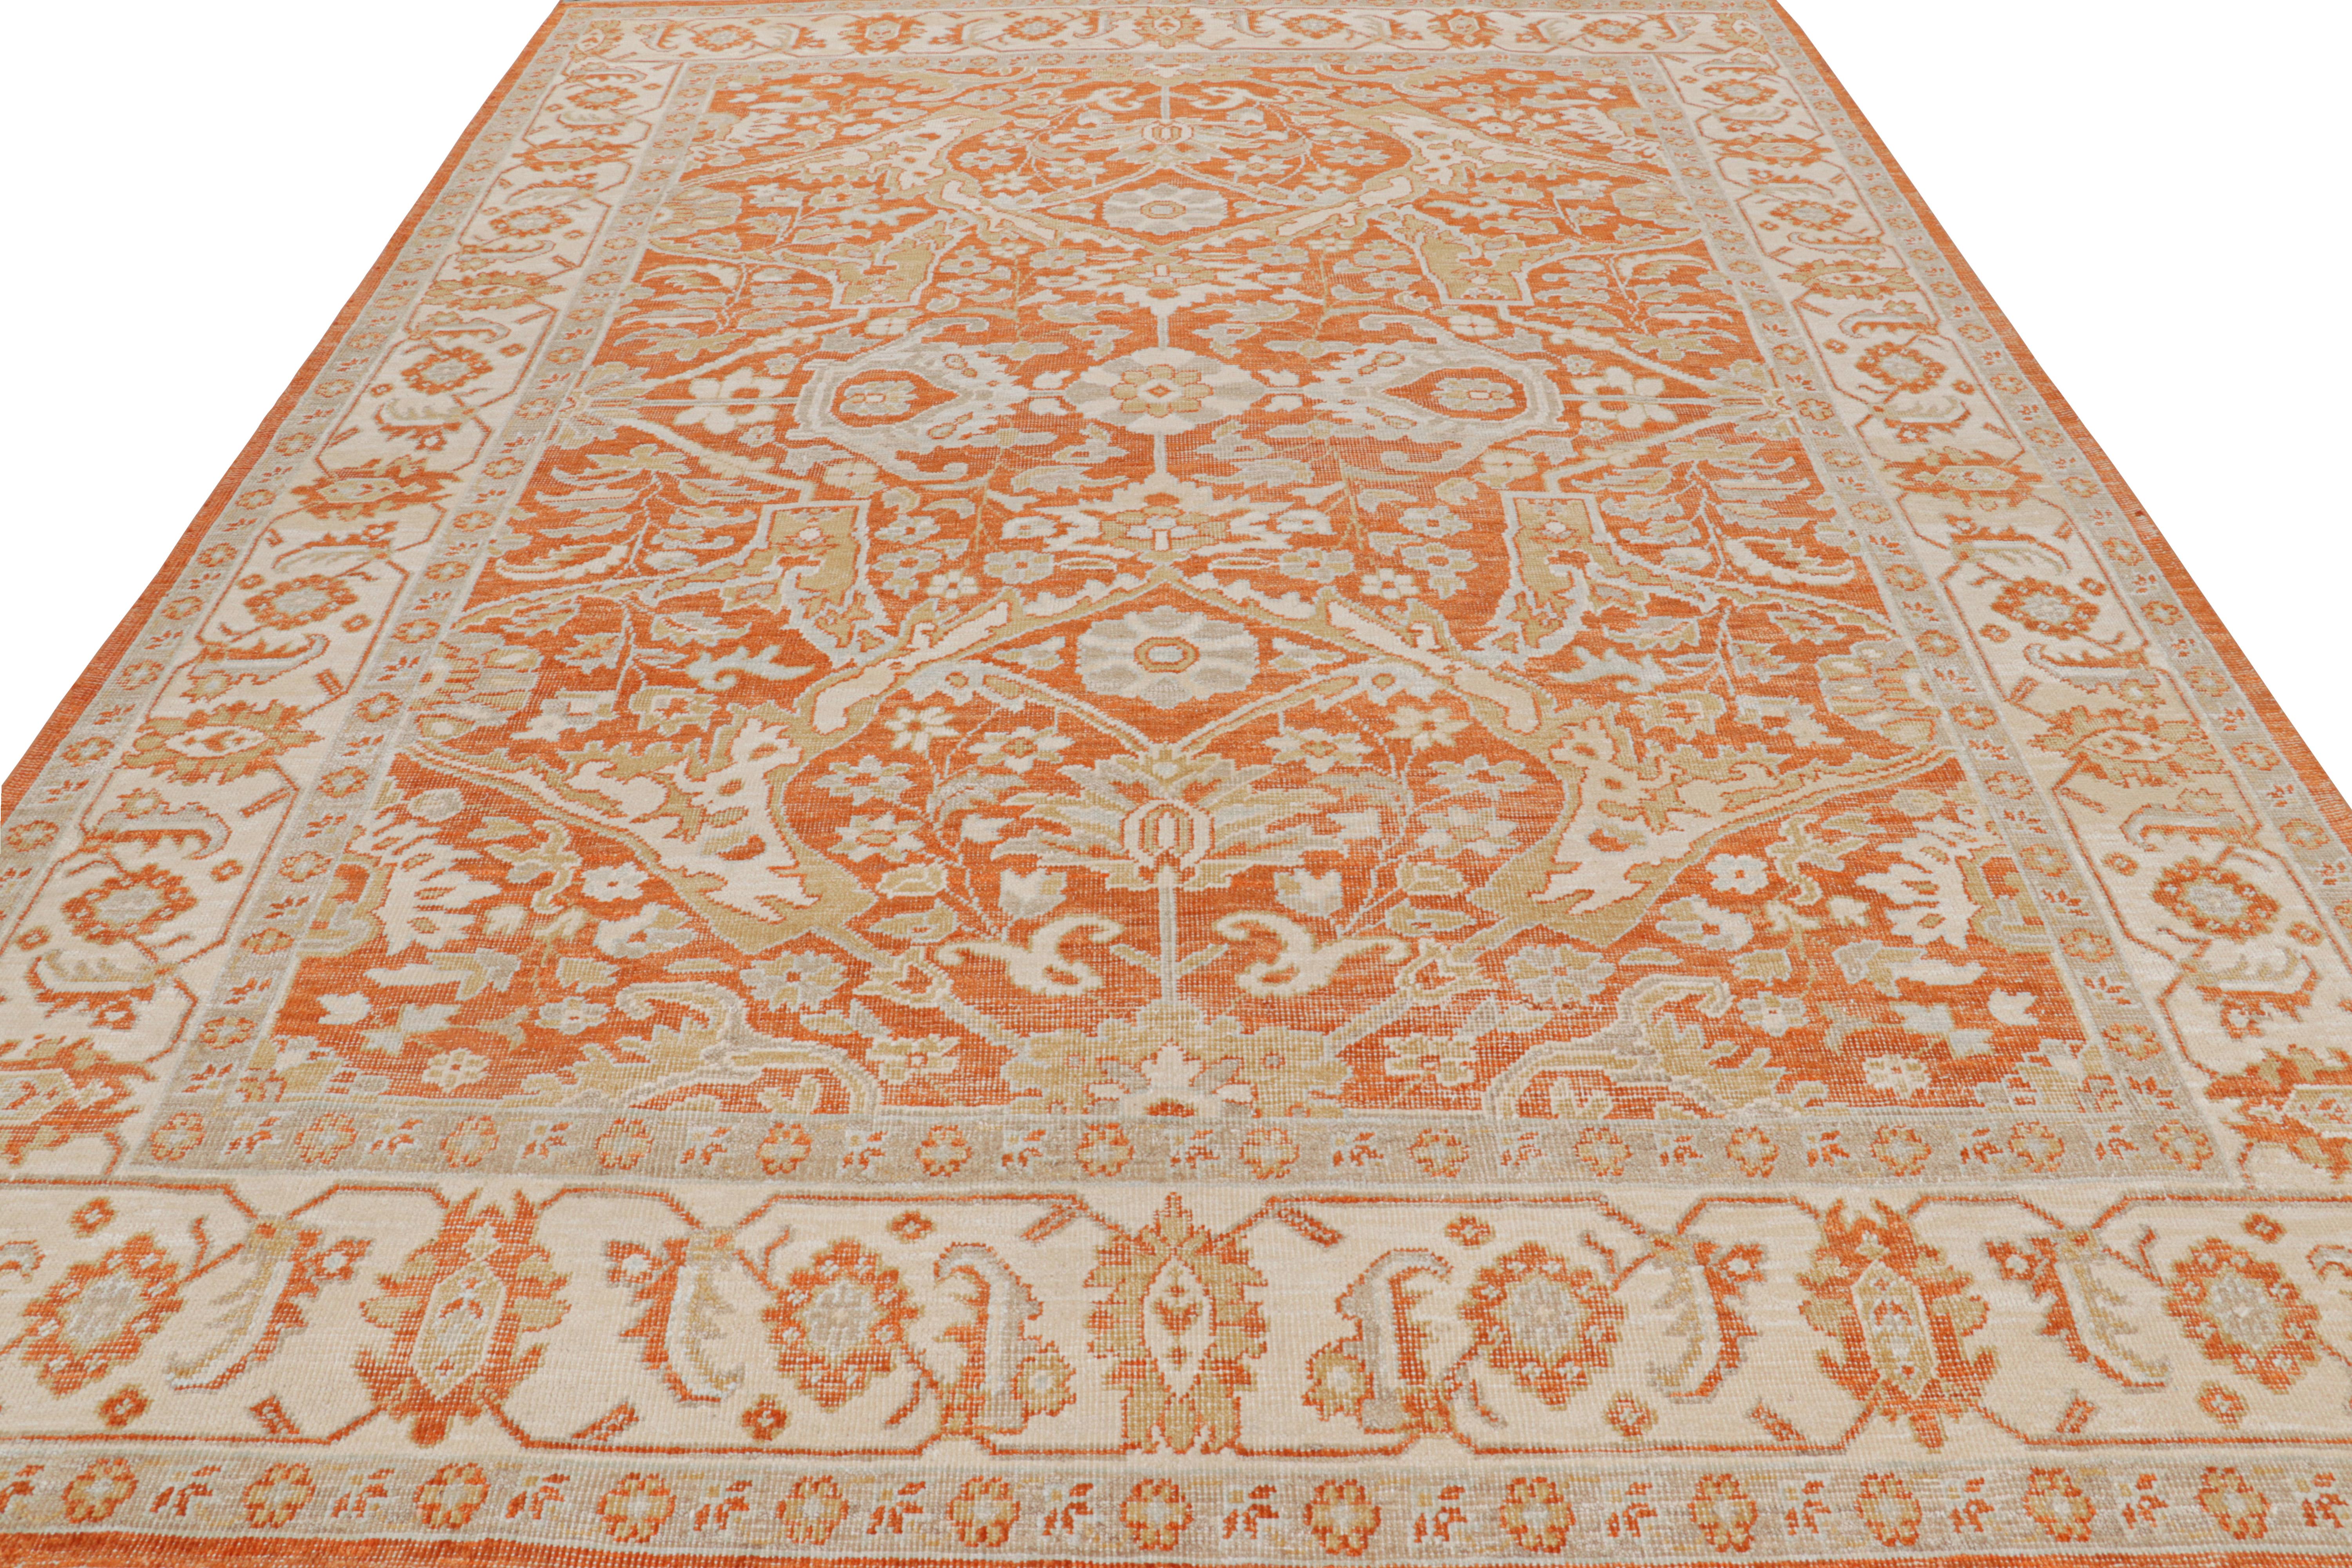 Hand-Knotted Rug & Kilim’s Oushak Style Rug in Orange with Floral Patterns in Beige and Gold For Sale